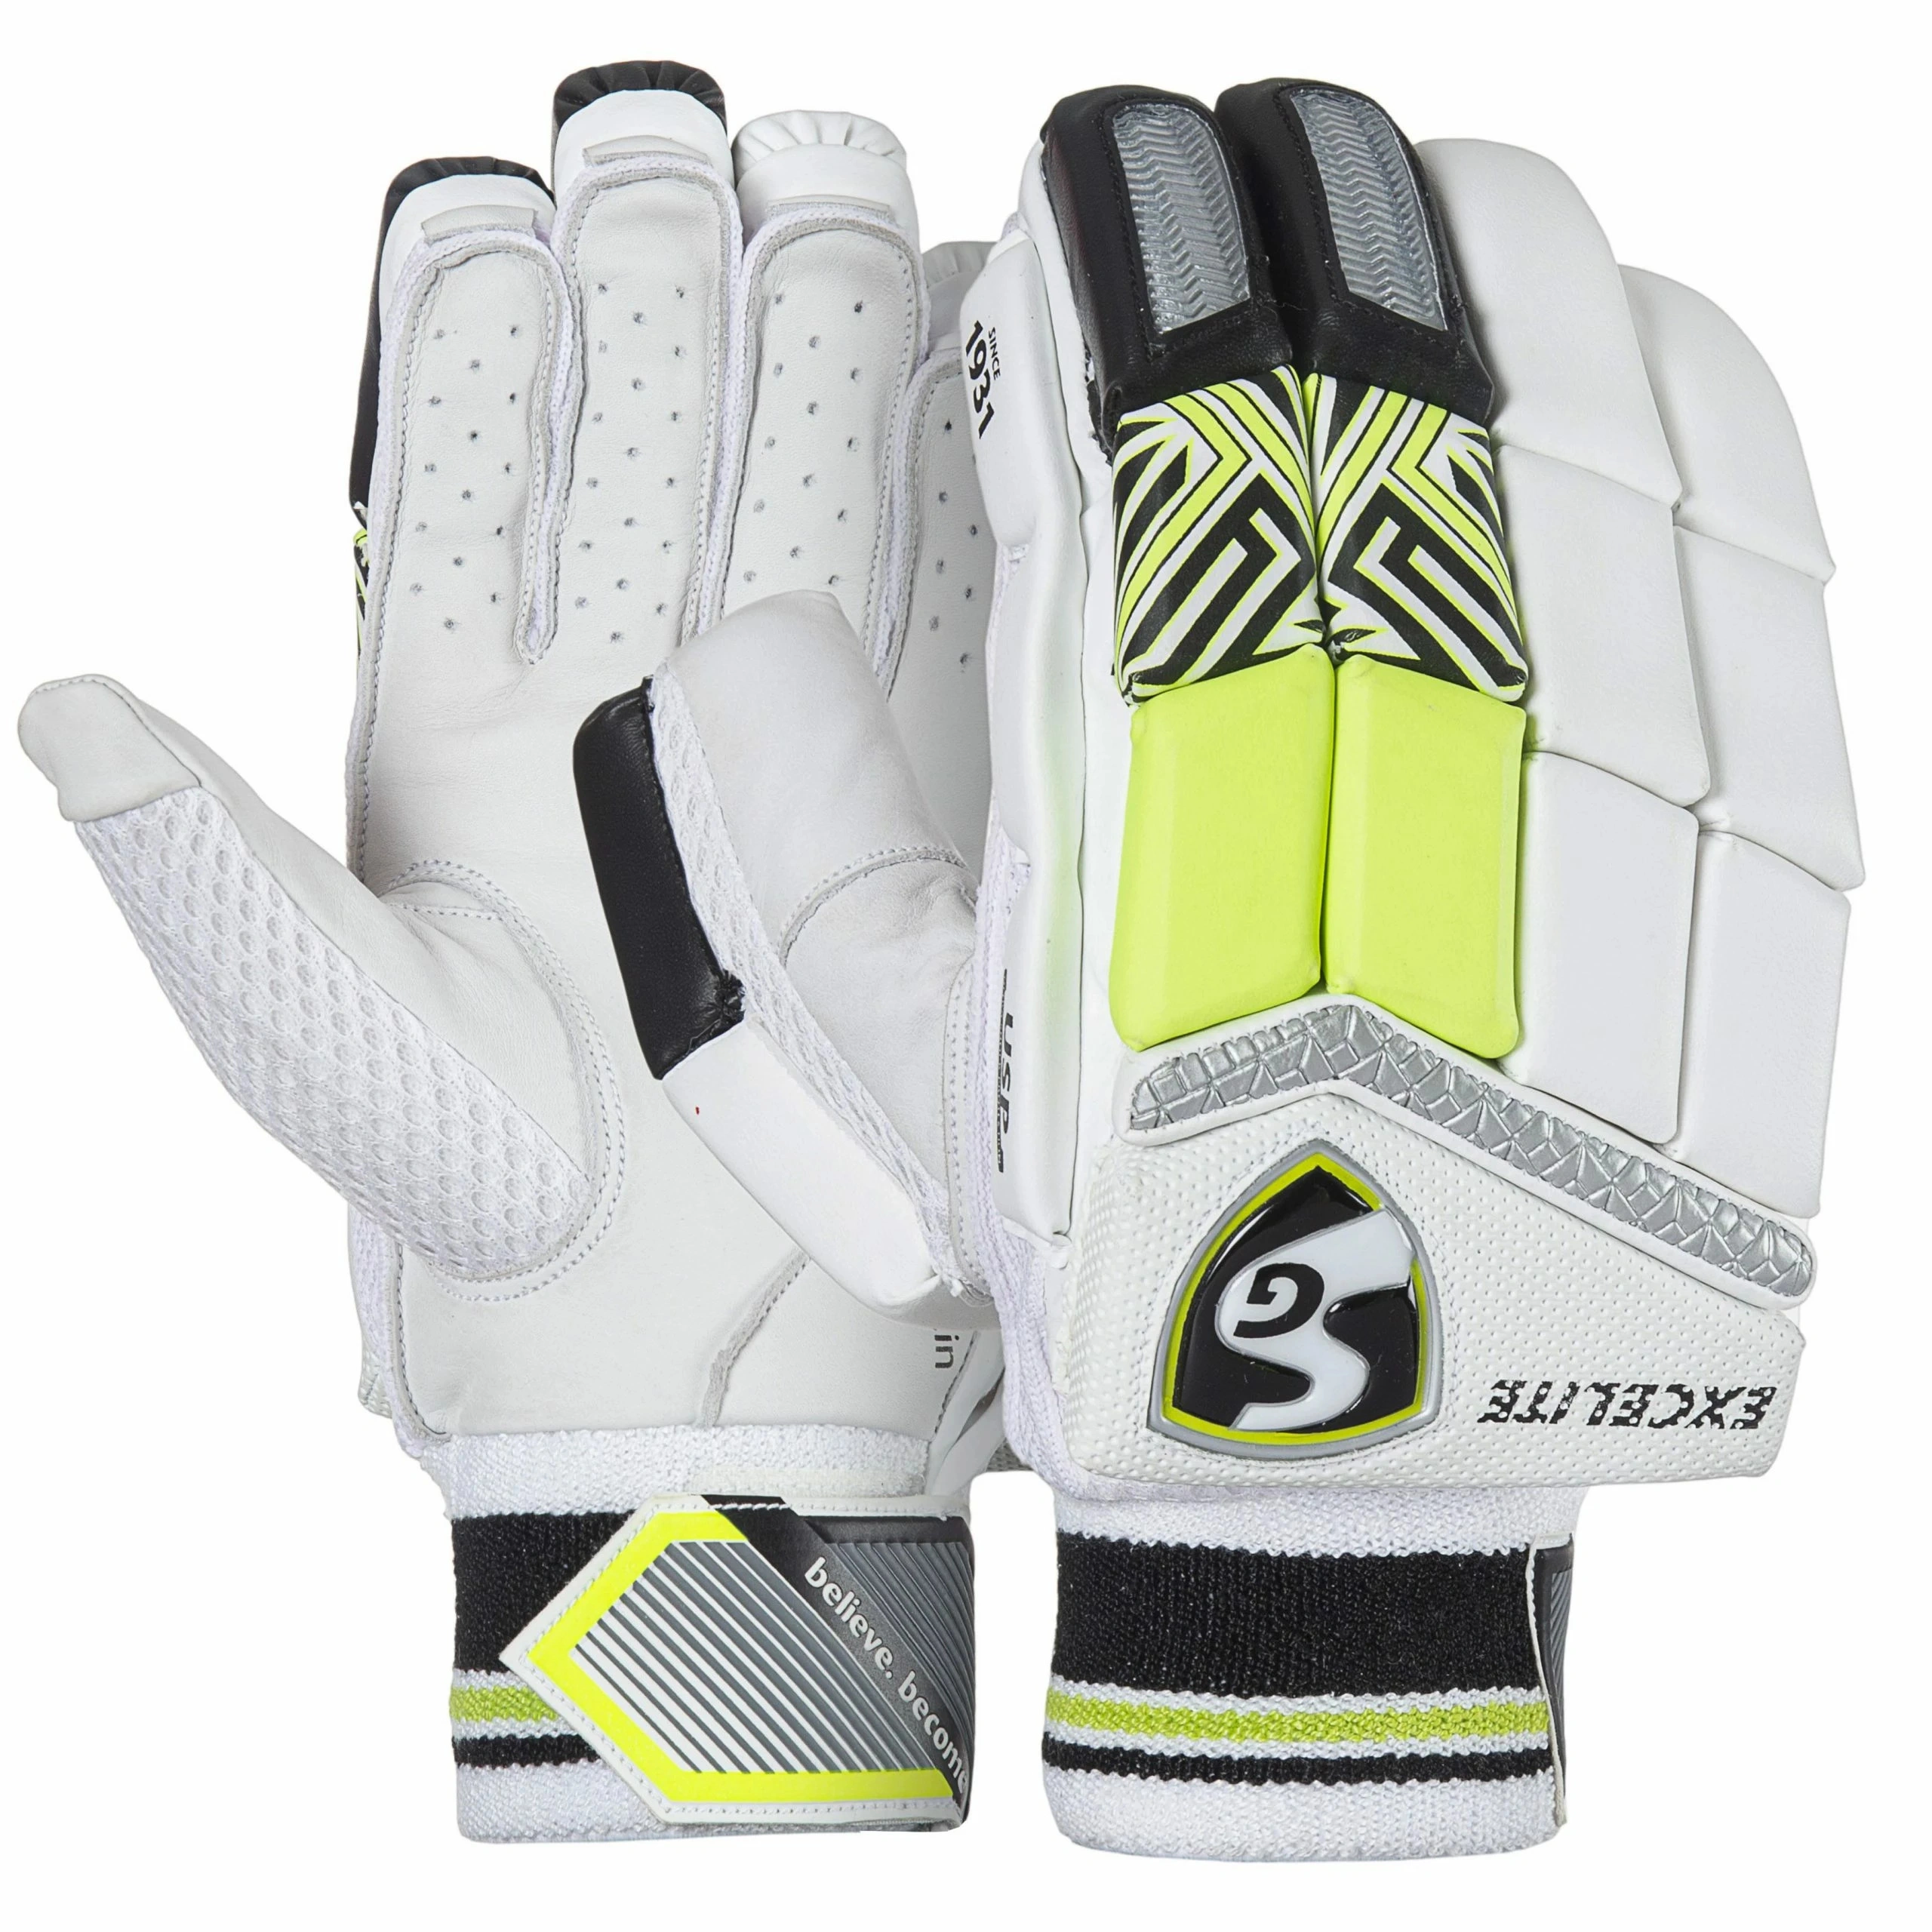 SG Excelite Batting Gloves High Quality Leather Palm-2291